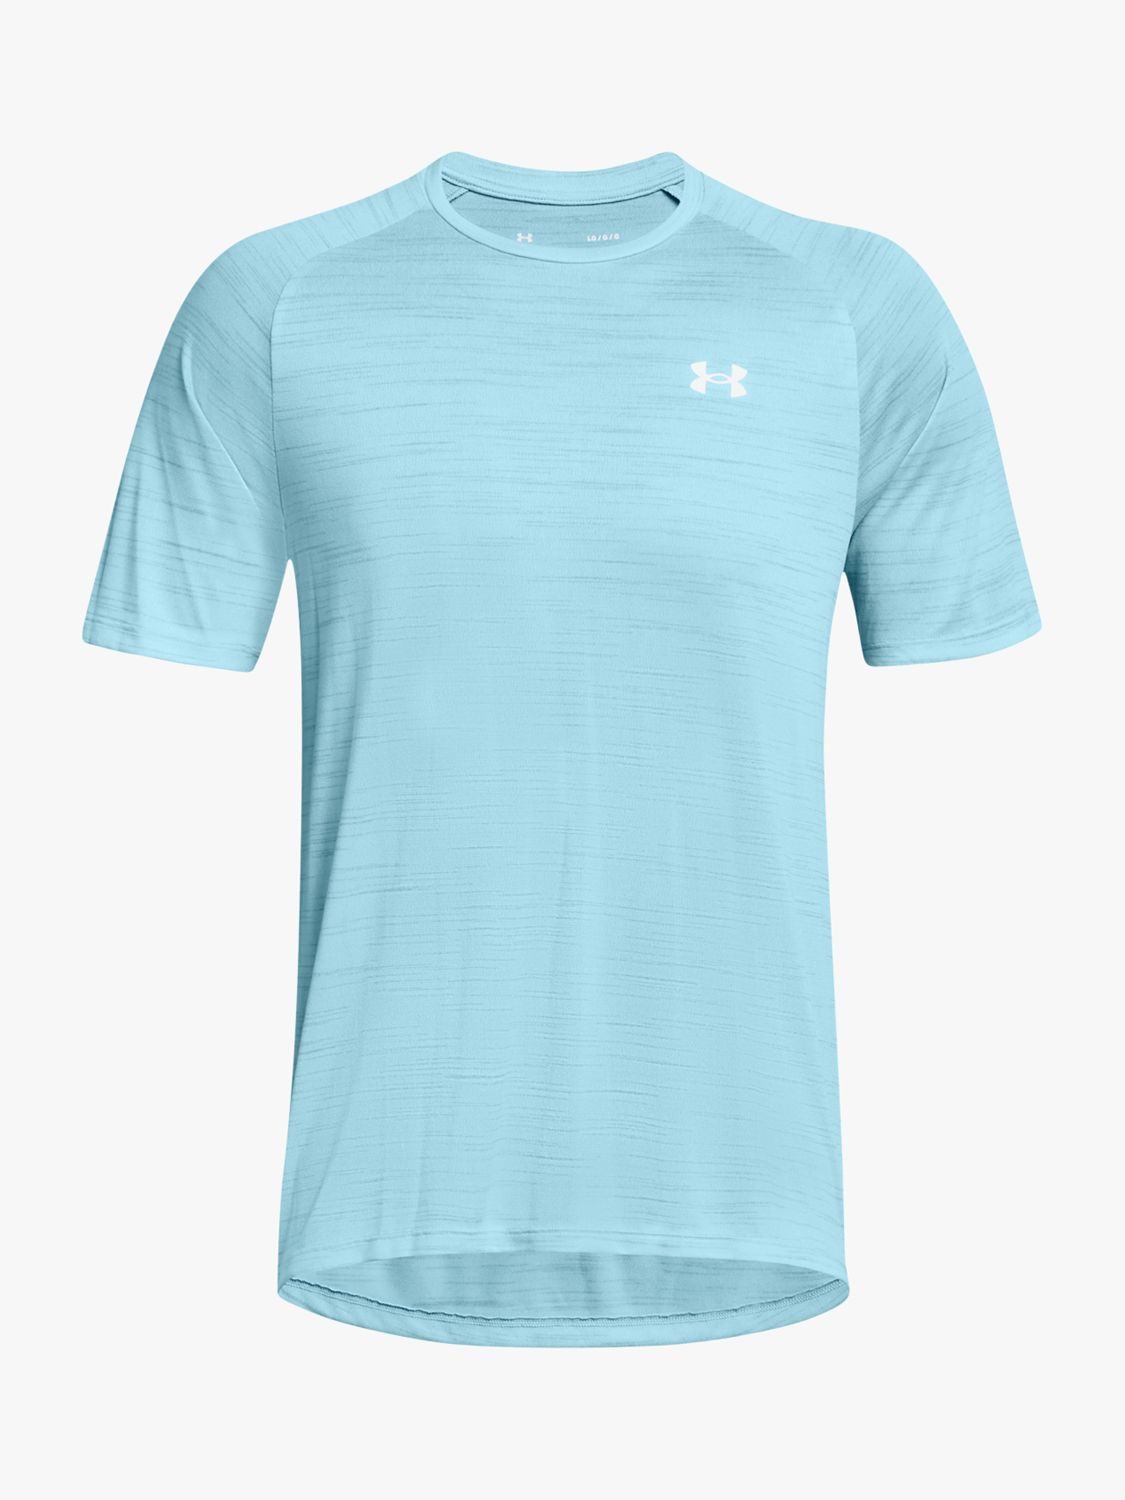 Under Armour Tech™ 2.0 Evolved Core Short Sleeve Gym Top, Blizzard/White, S